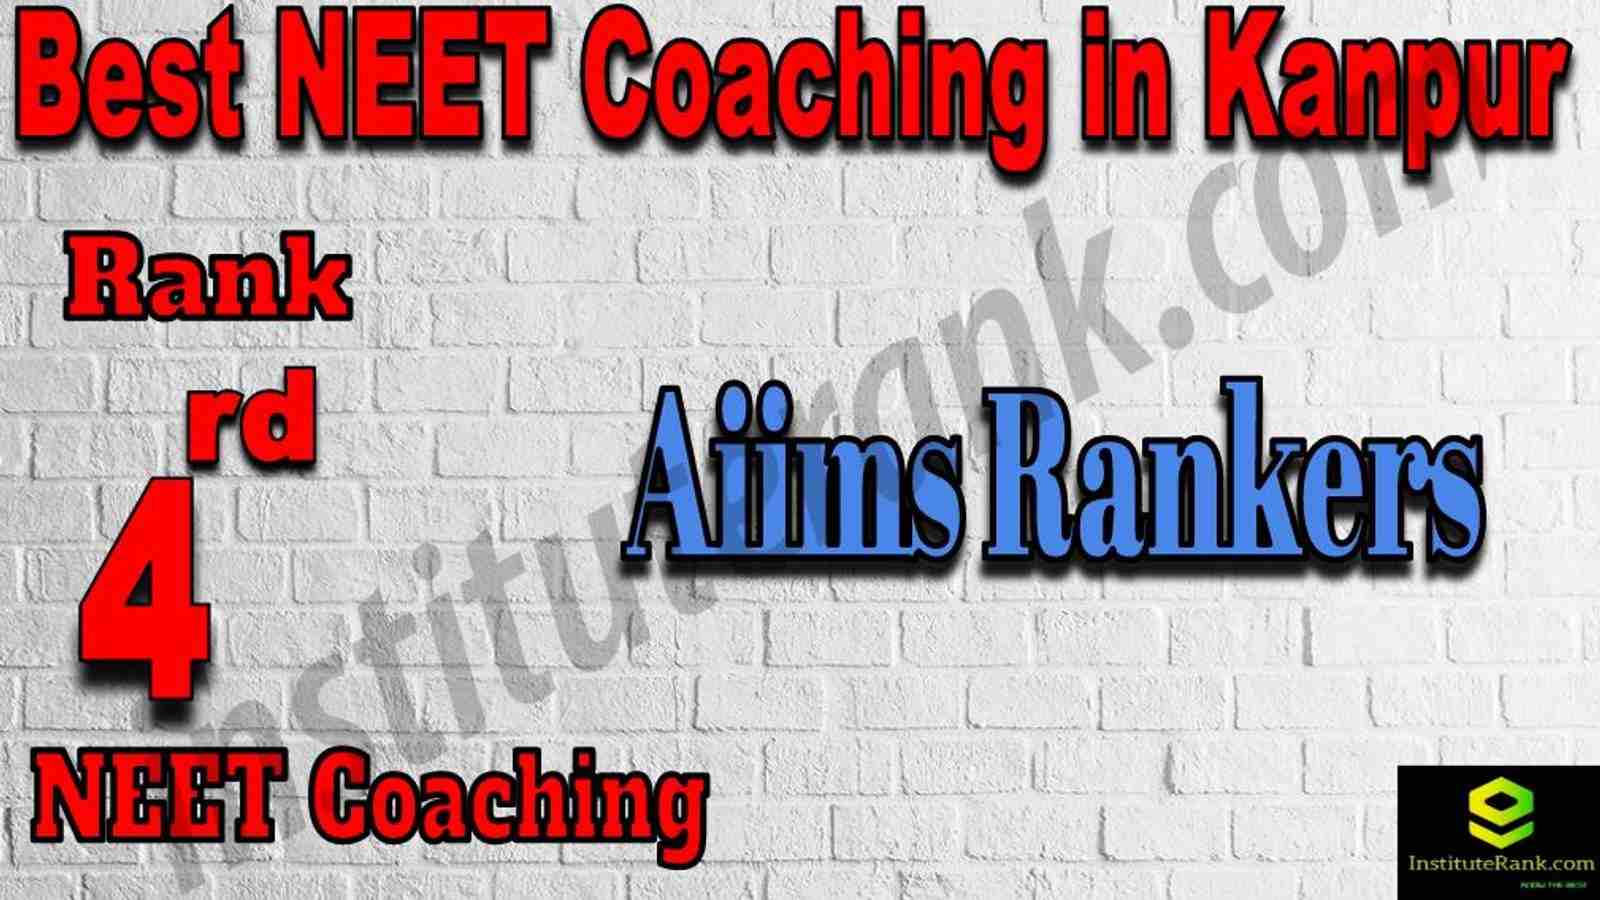 4th Best Neet Coaching in Kanpur